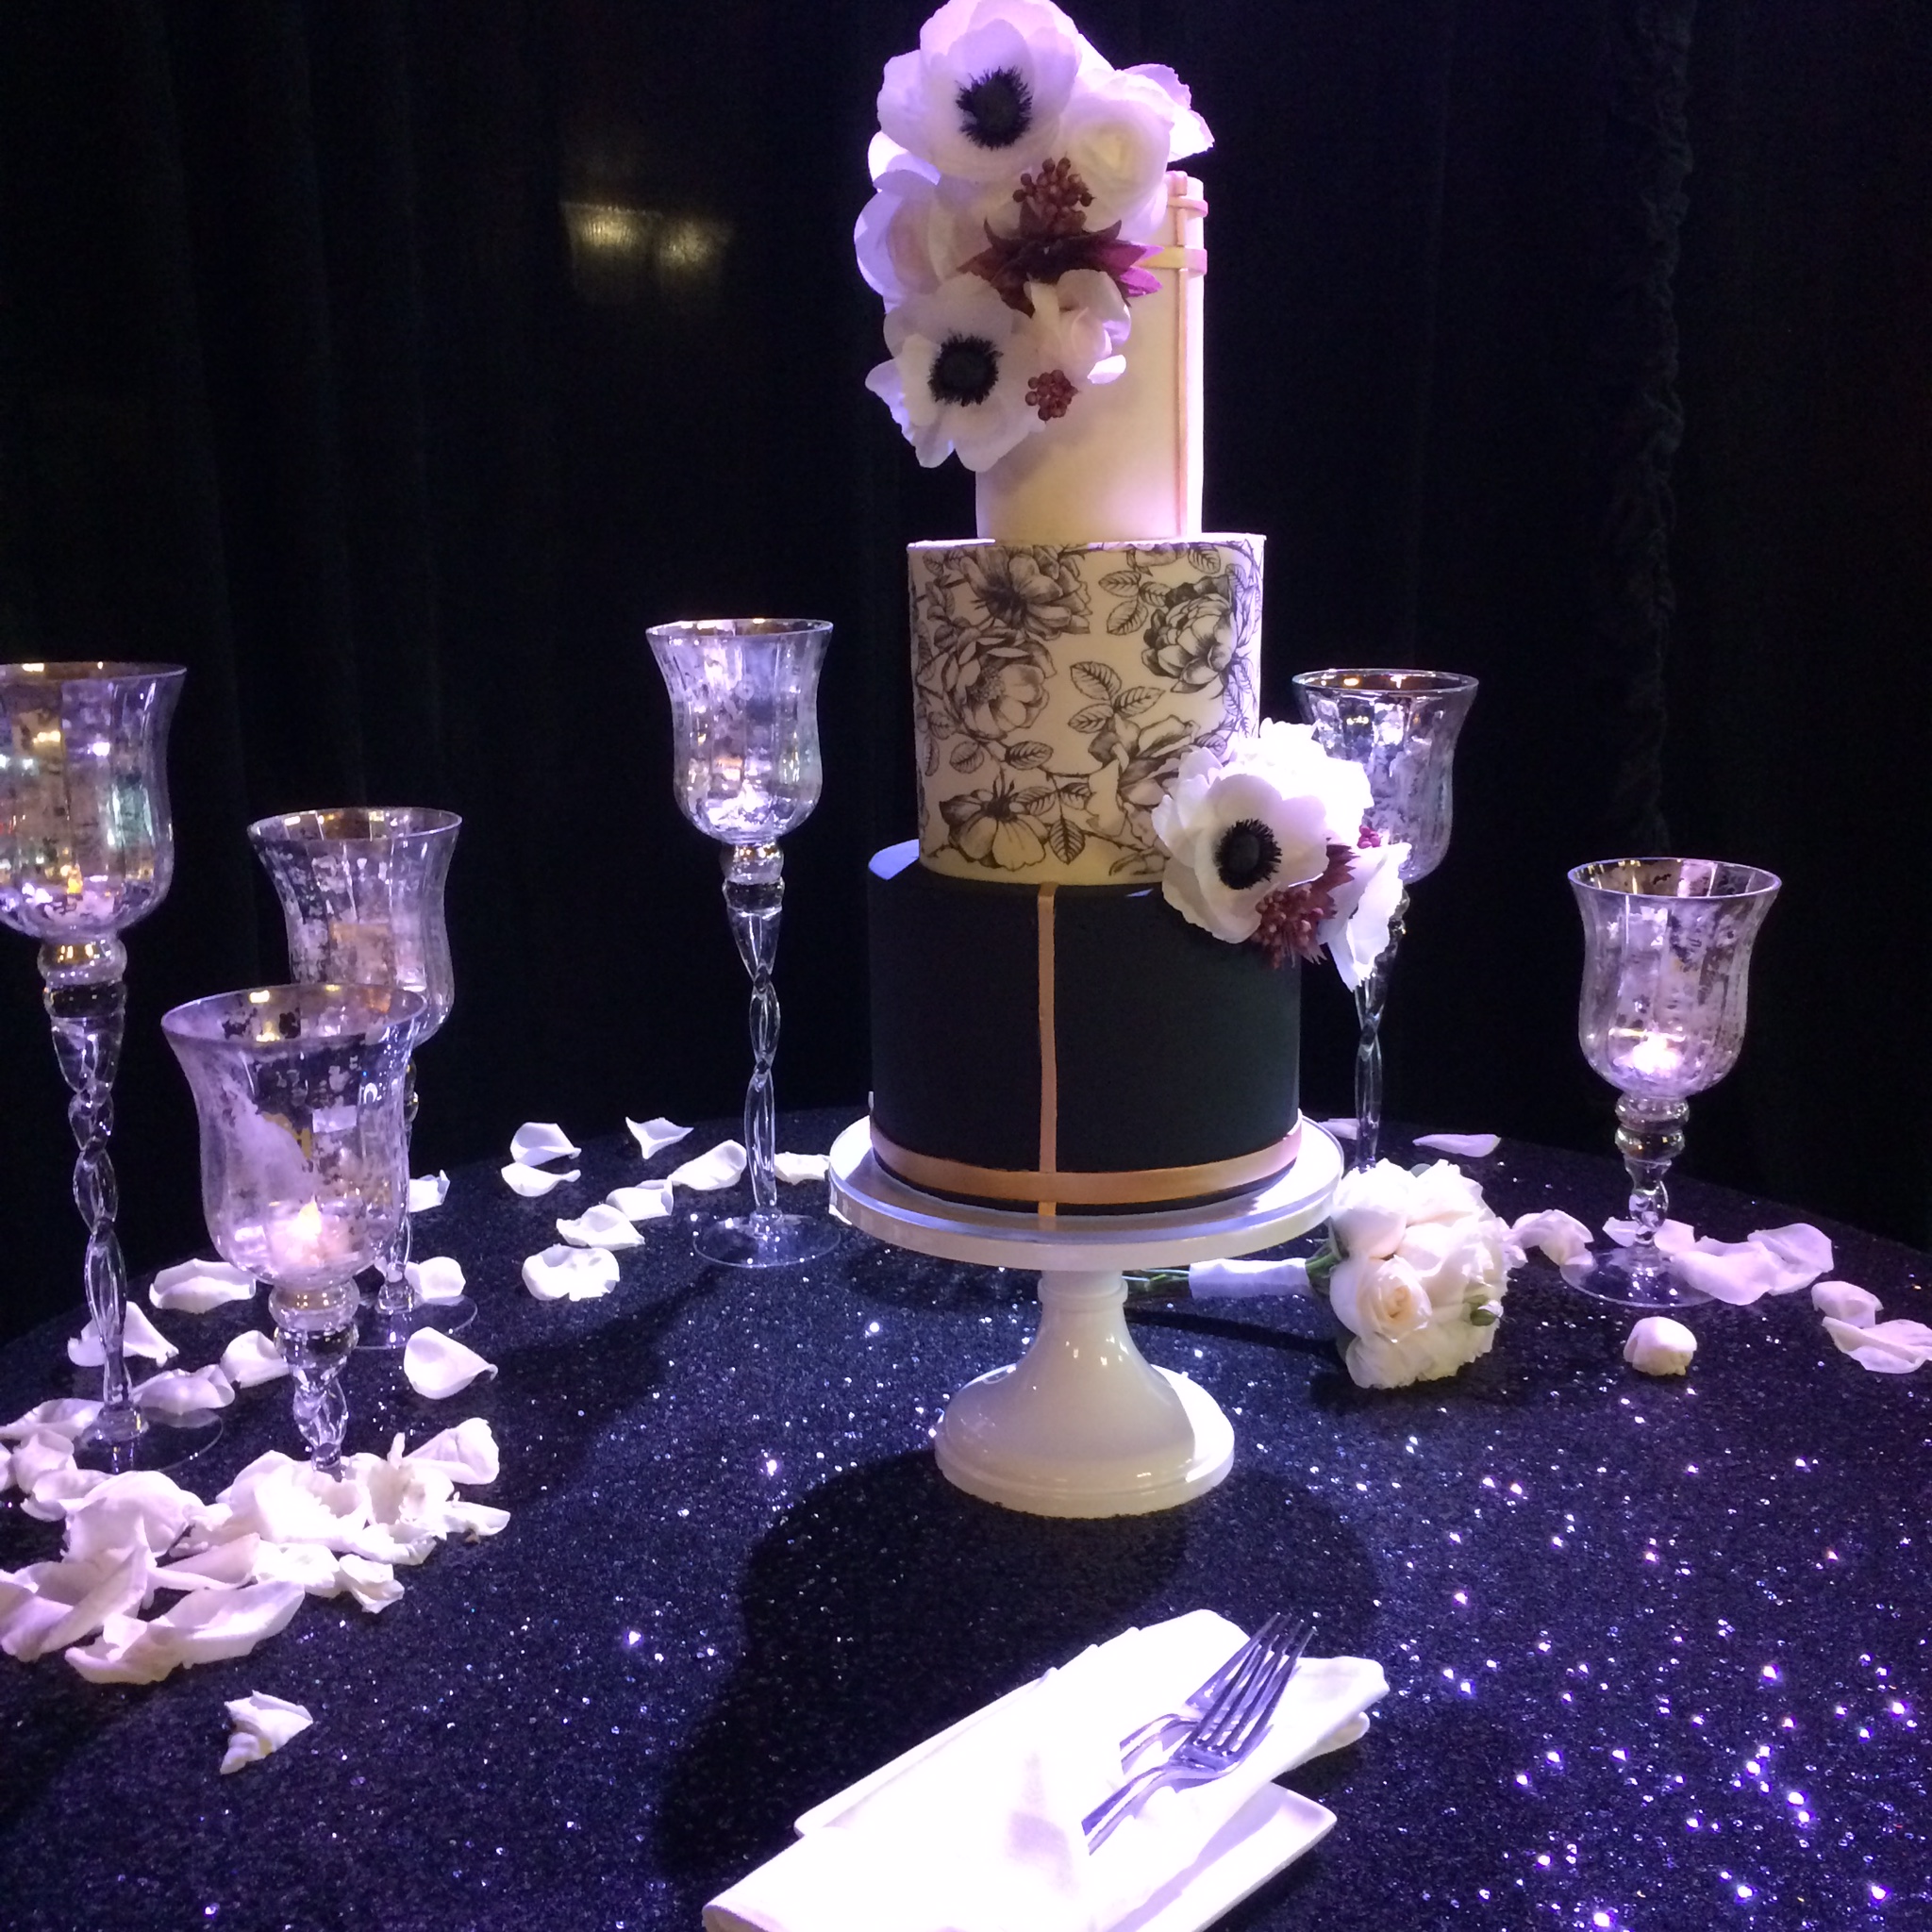   A wedding cake with a spotlight nicely illuminates this focal point of every wedding reception.&nbsp;  